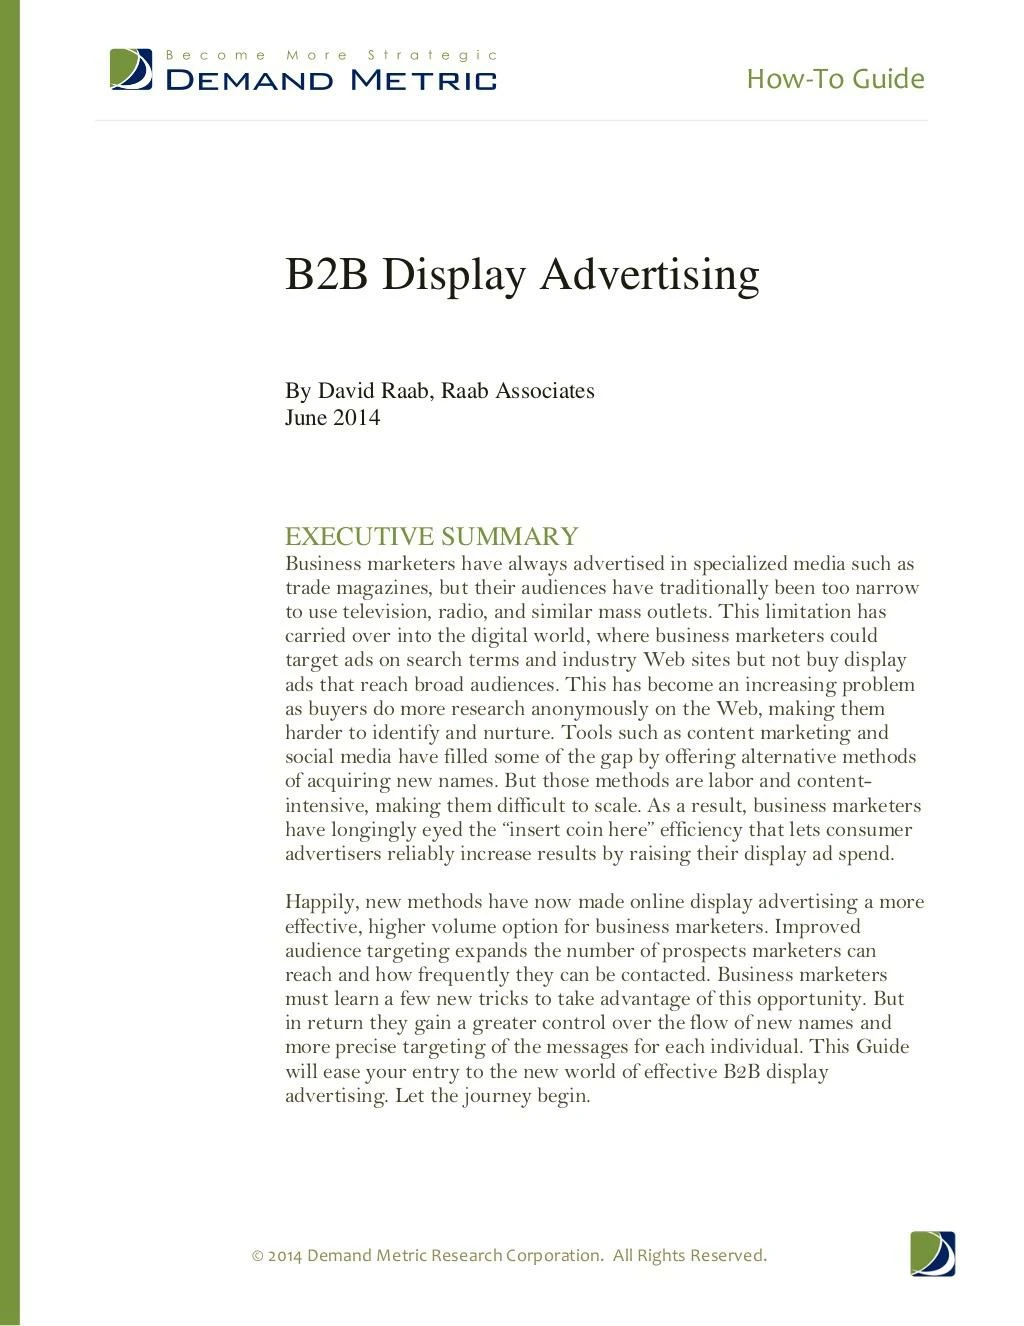 how to guide b2b display advertising